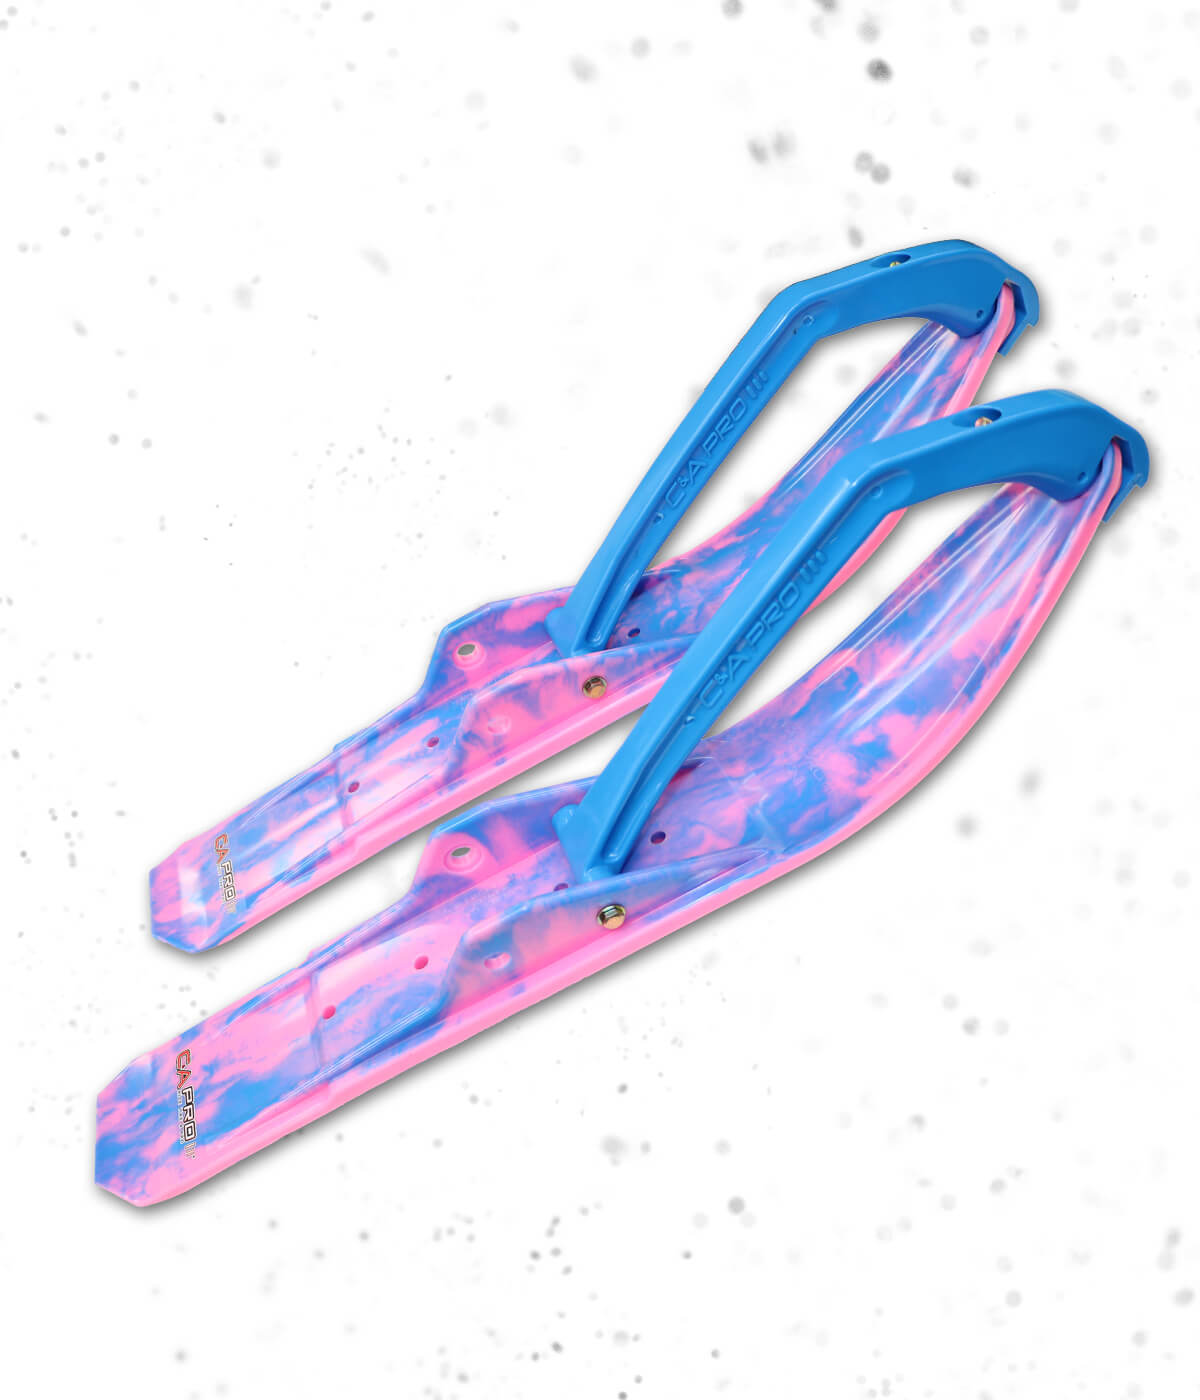 C&A Pro custom Mini skis with Pink base, Sky Blue accent and Sky Blue handles